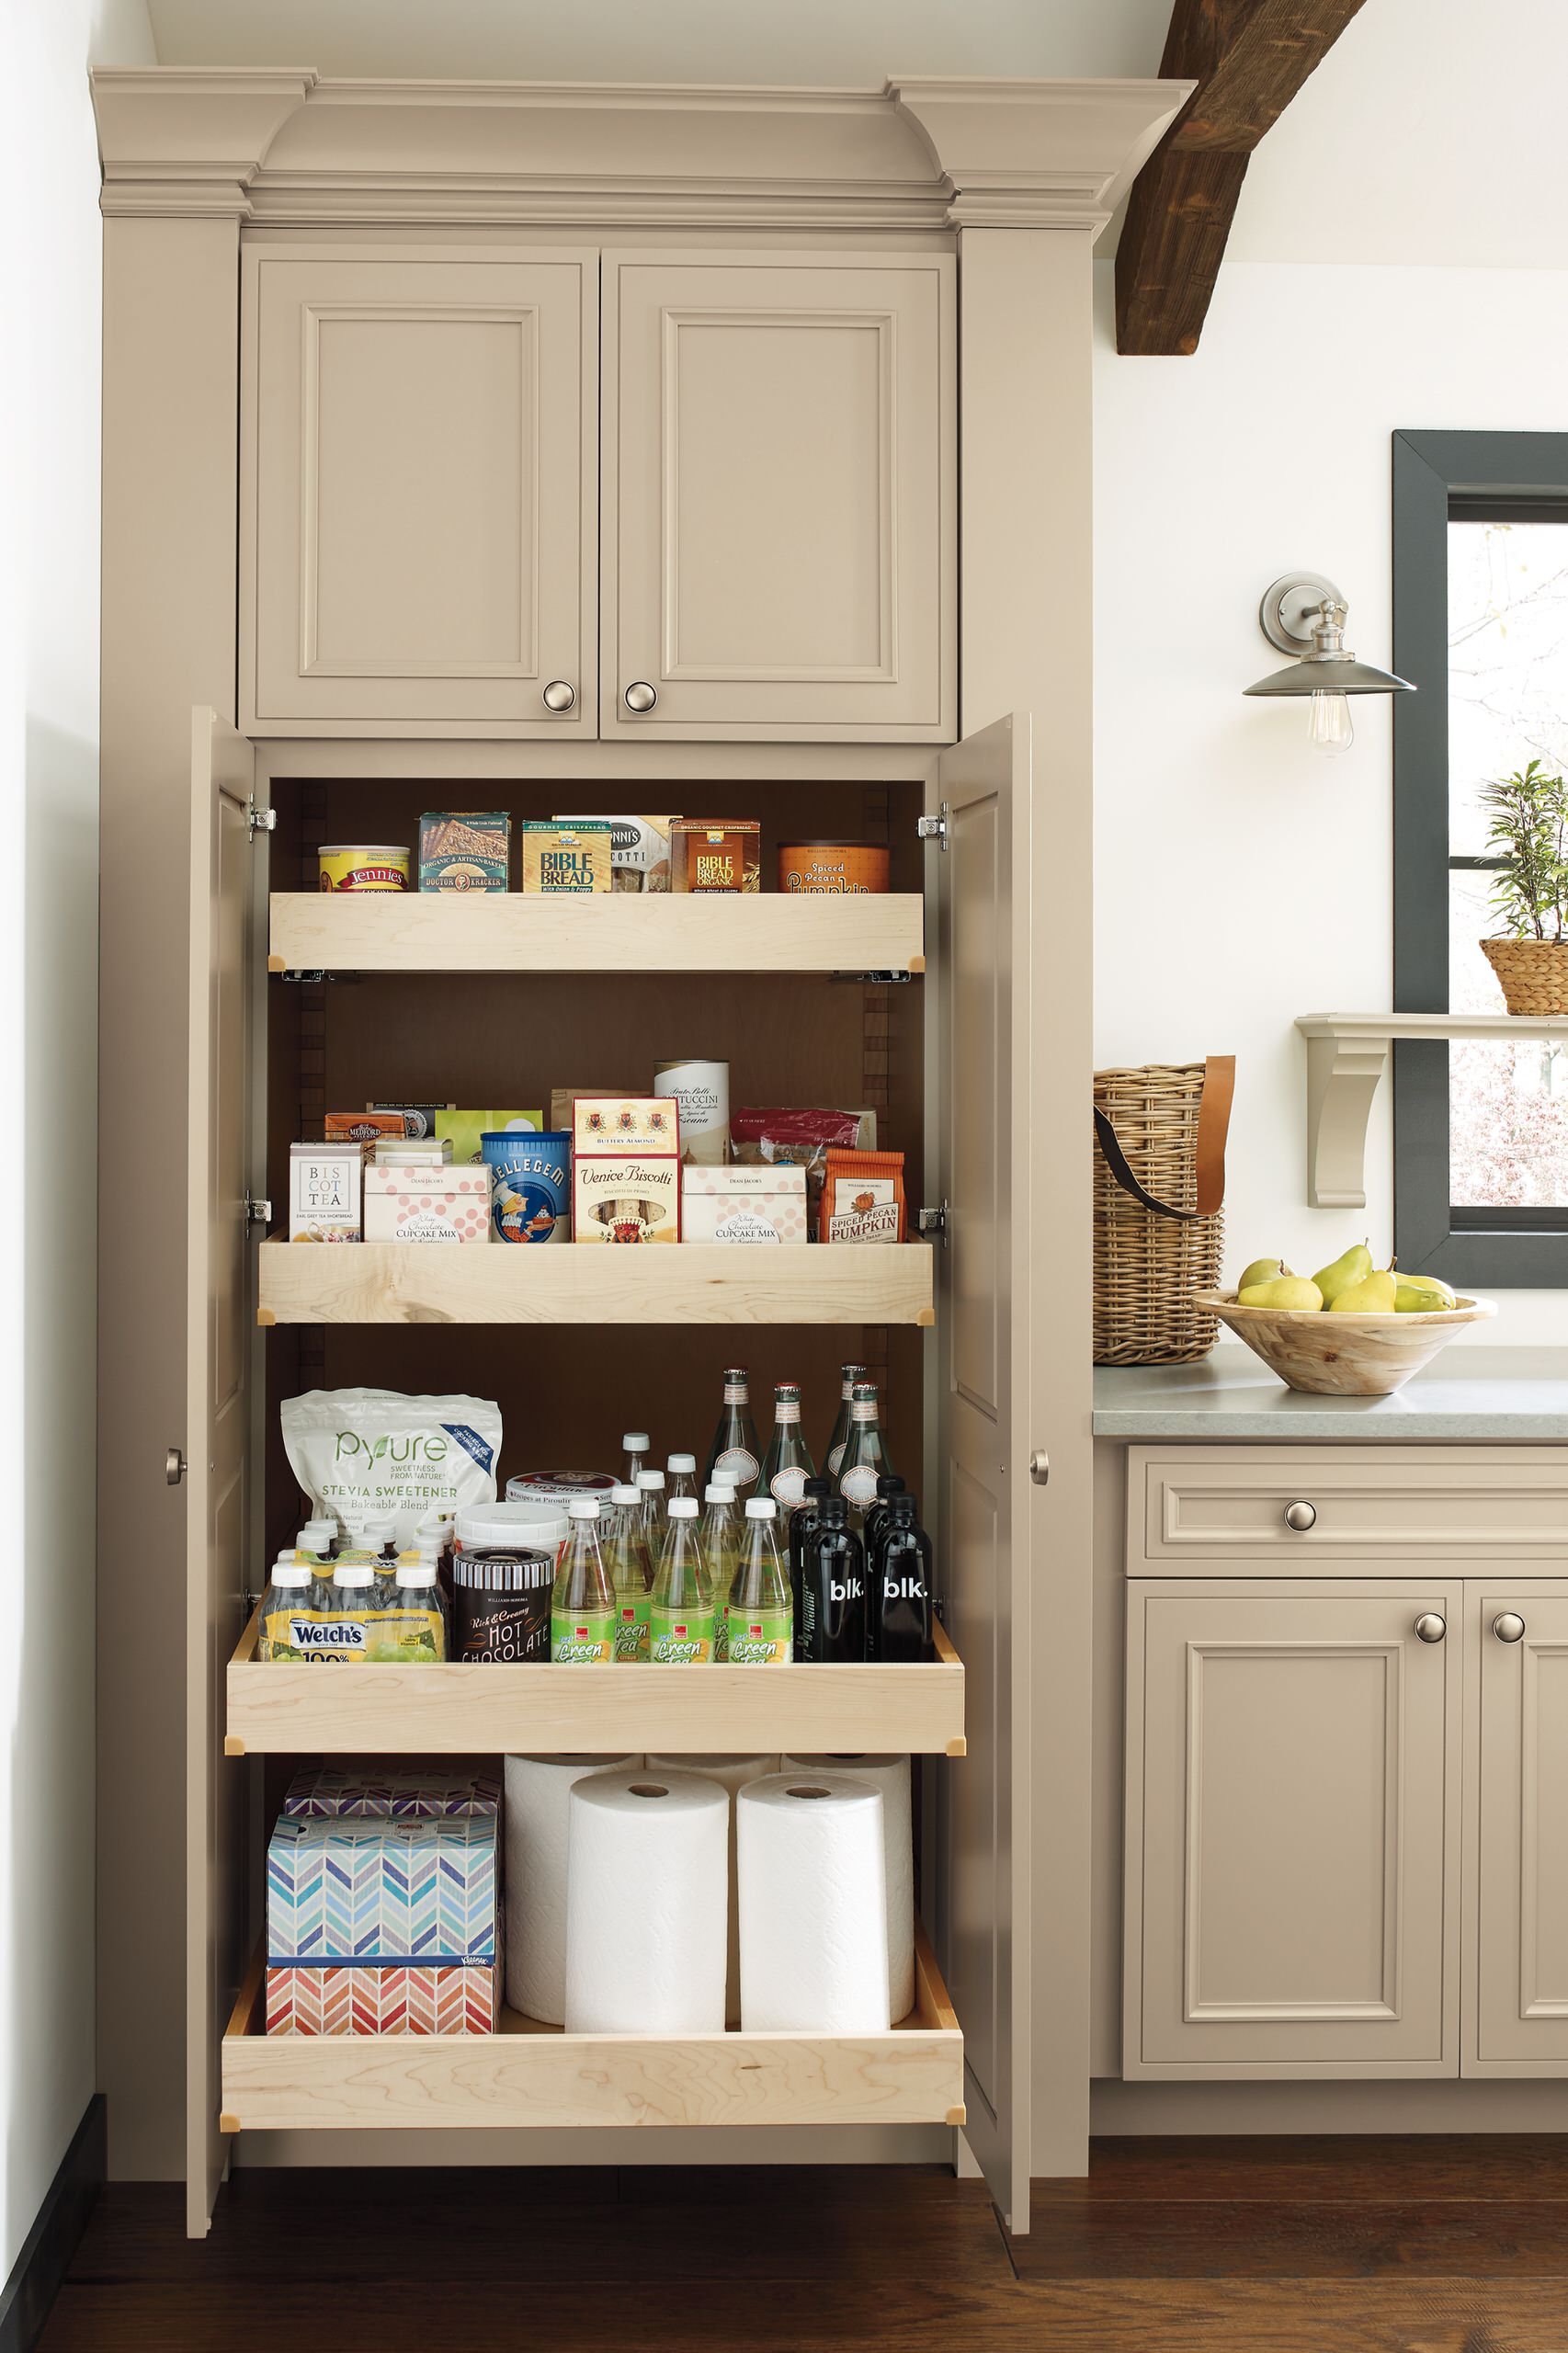 Slide Out Pantry Cabinets Design Ideas